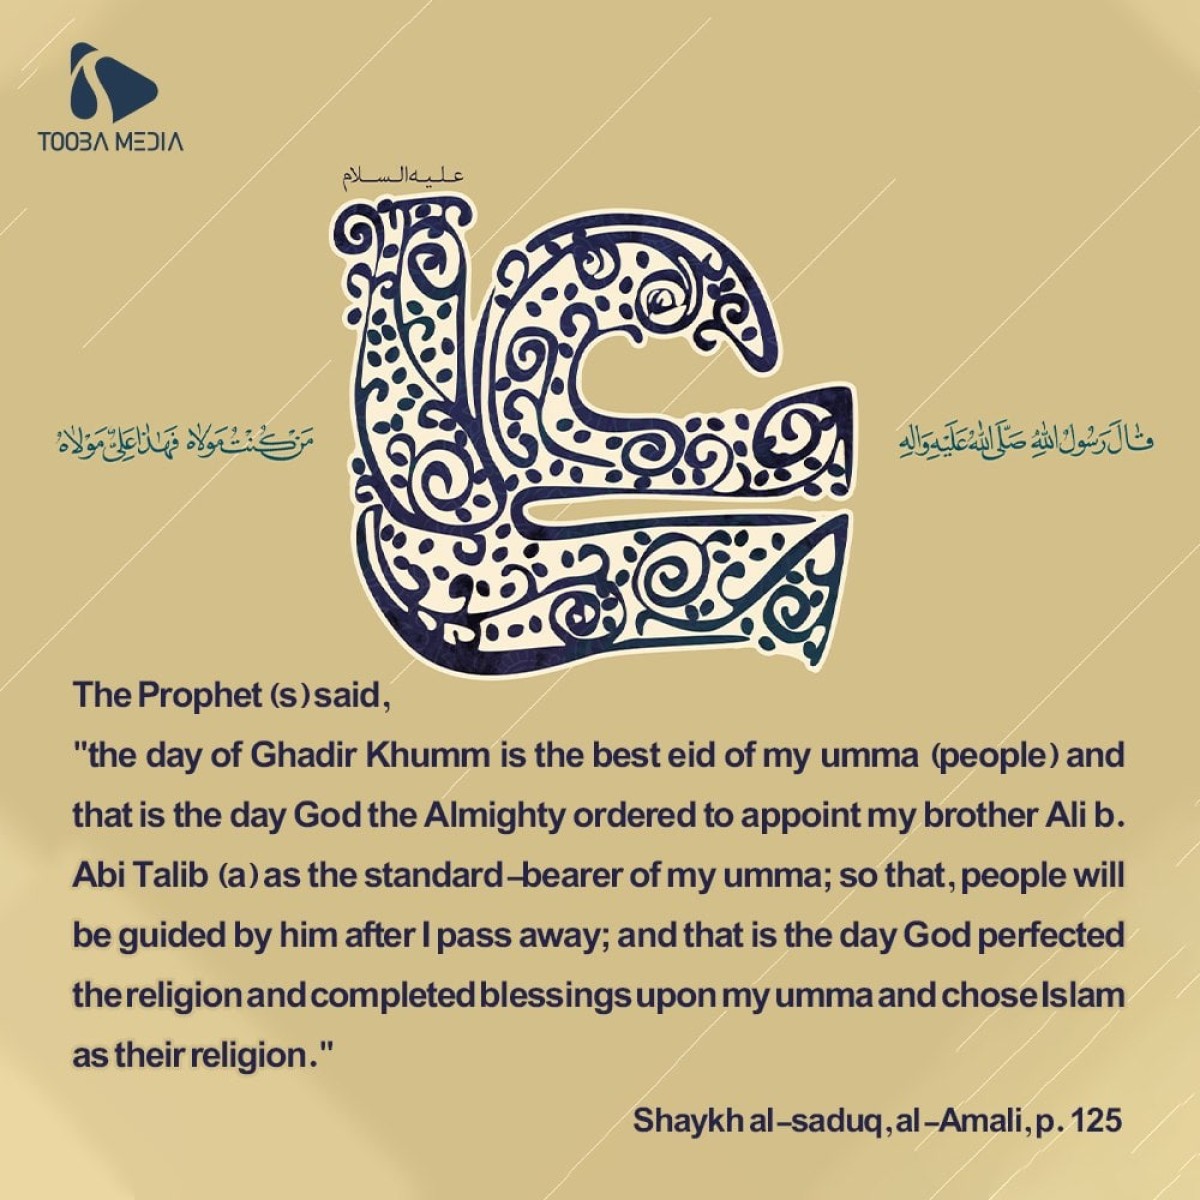 the day of Ghadir Khumm is the best eid of my umma